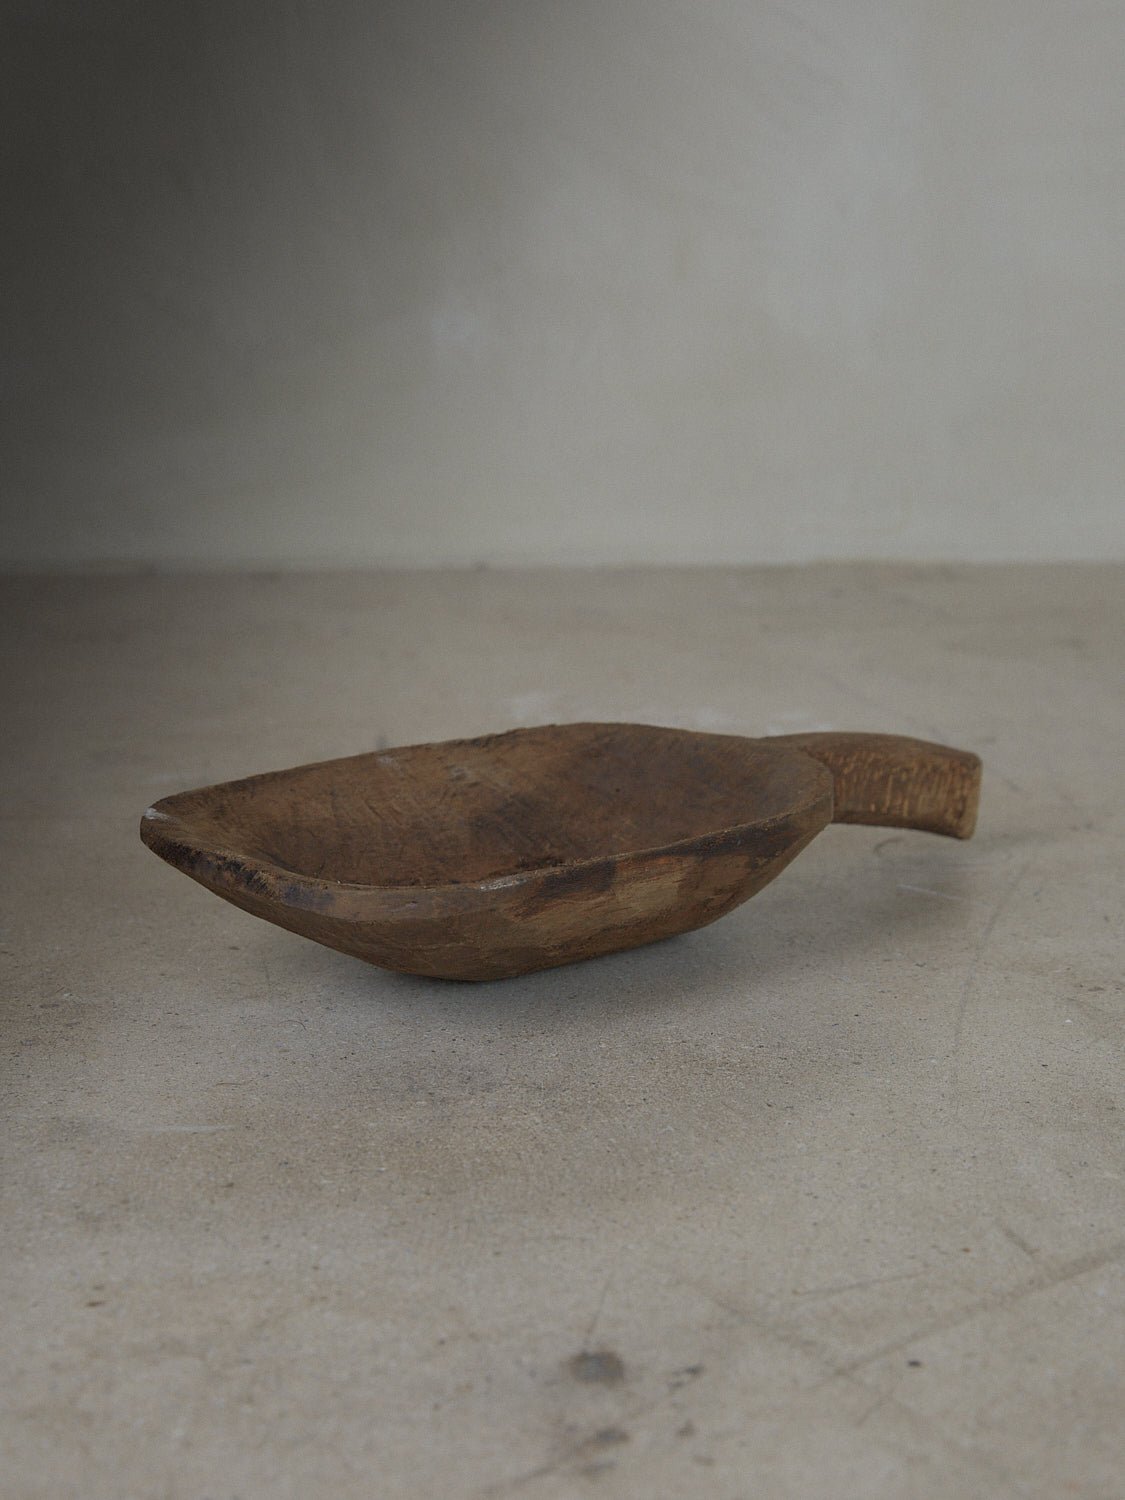 Vintage Grain Scoop. Rare find. Raw, wide African grain scoop with gently arched handle and curved rectangular bowl